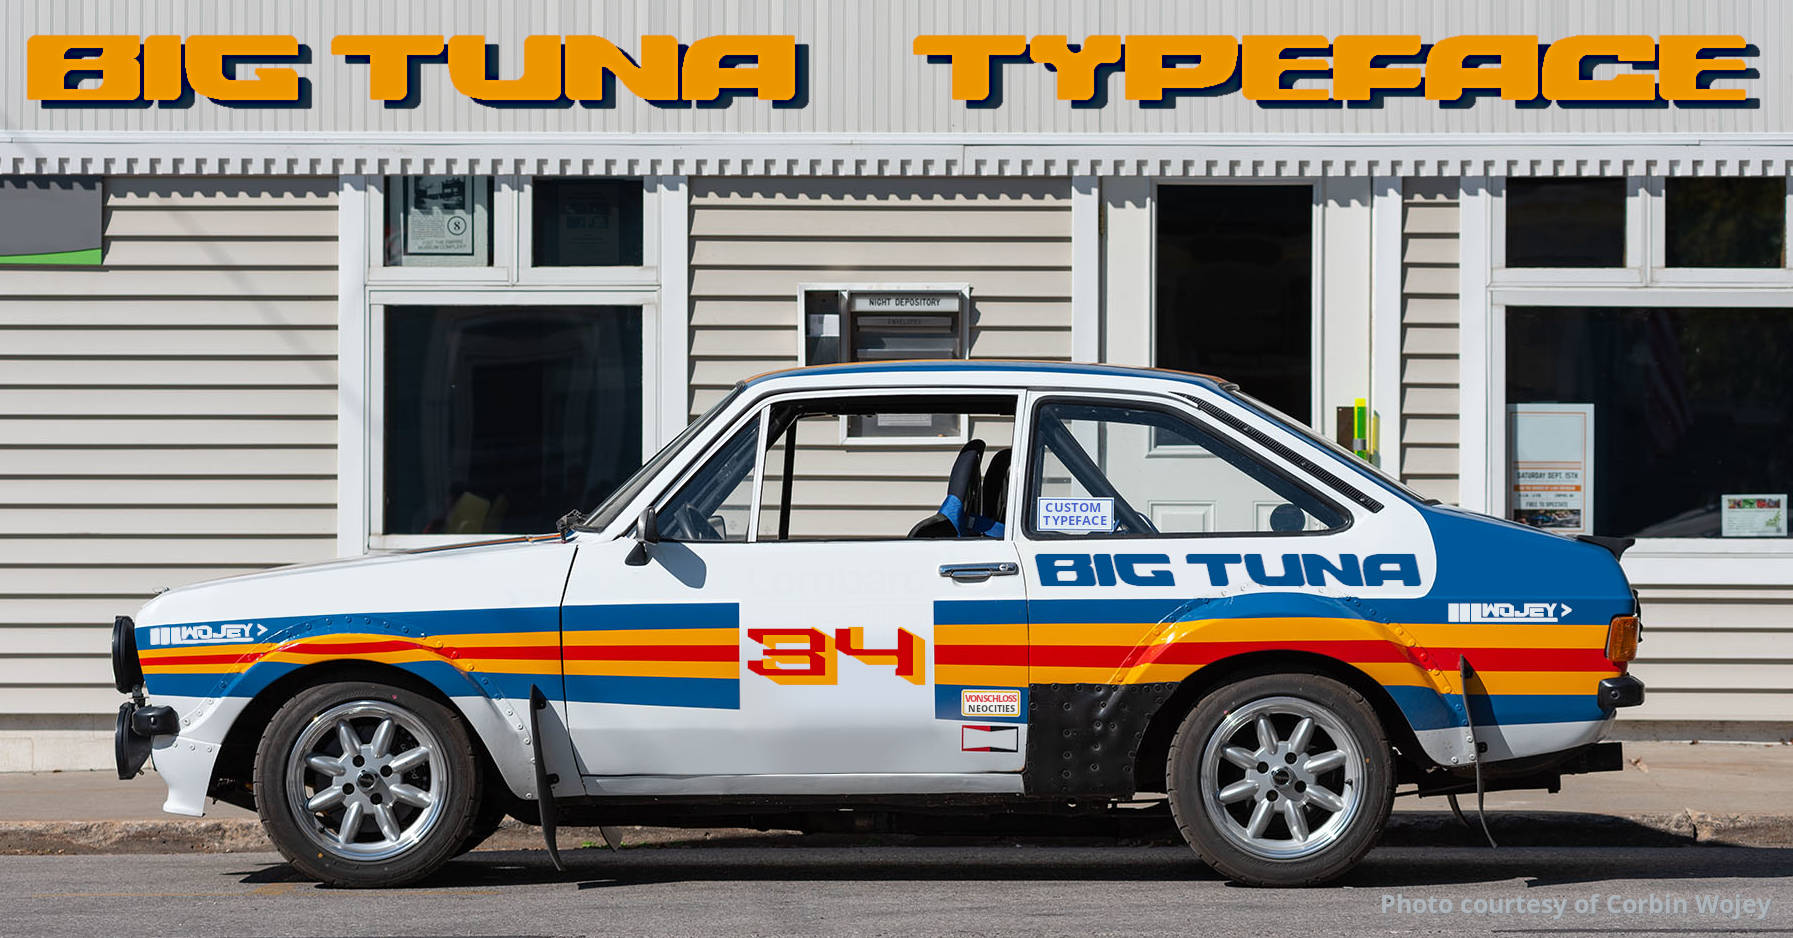 A retro inspired typeface called Big Tuna. The font is shown on the side of a colorfully branded retro race car.